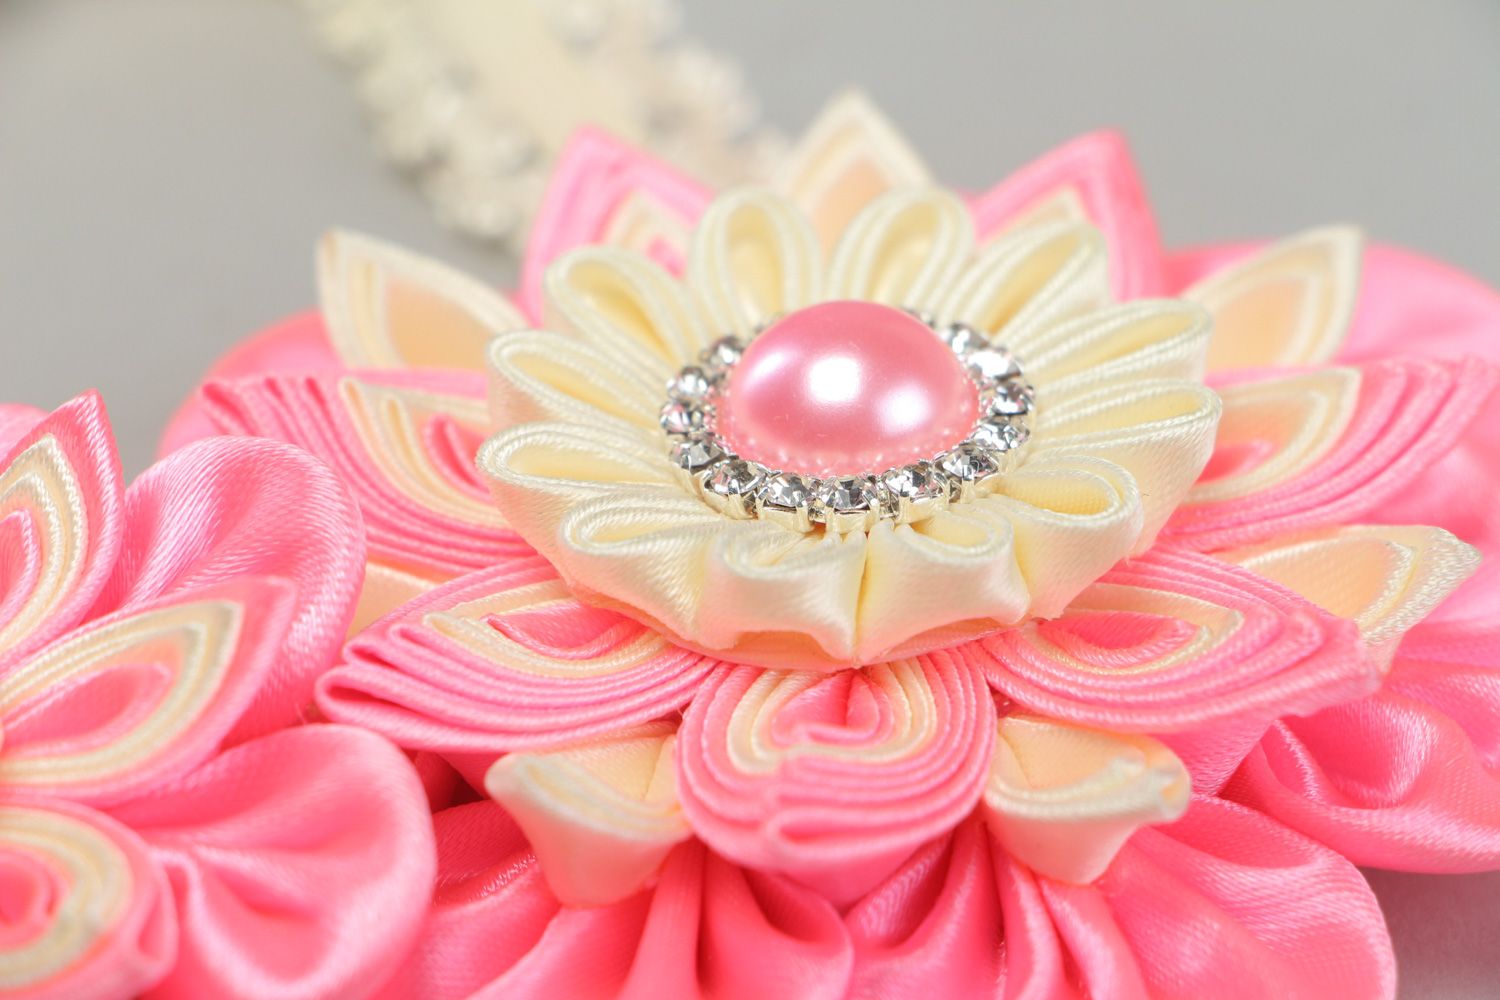 Handmade designer headband with satin ribbon flower in pink and cream colors photo 3